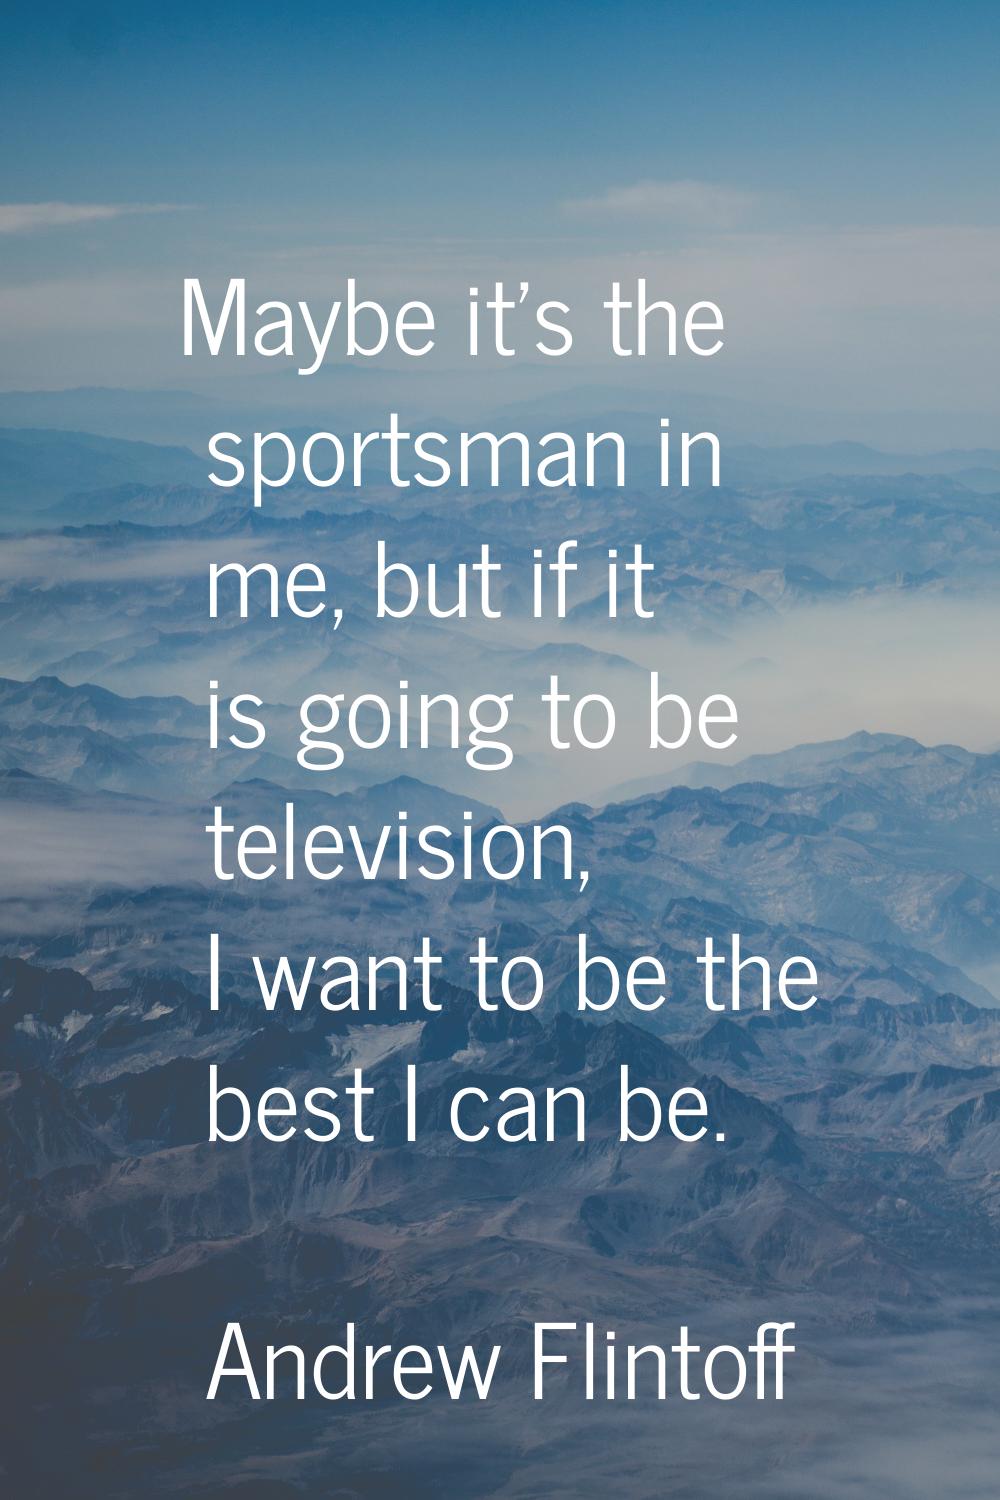 Maybe it's the sportsman in me, but if it is going to be television, I want to be the best I can be